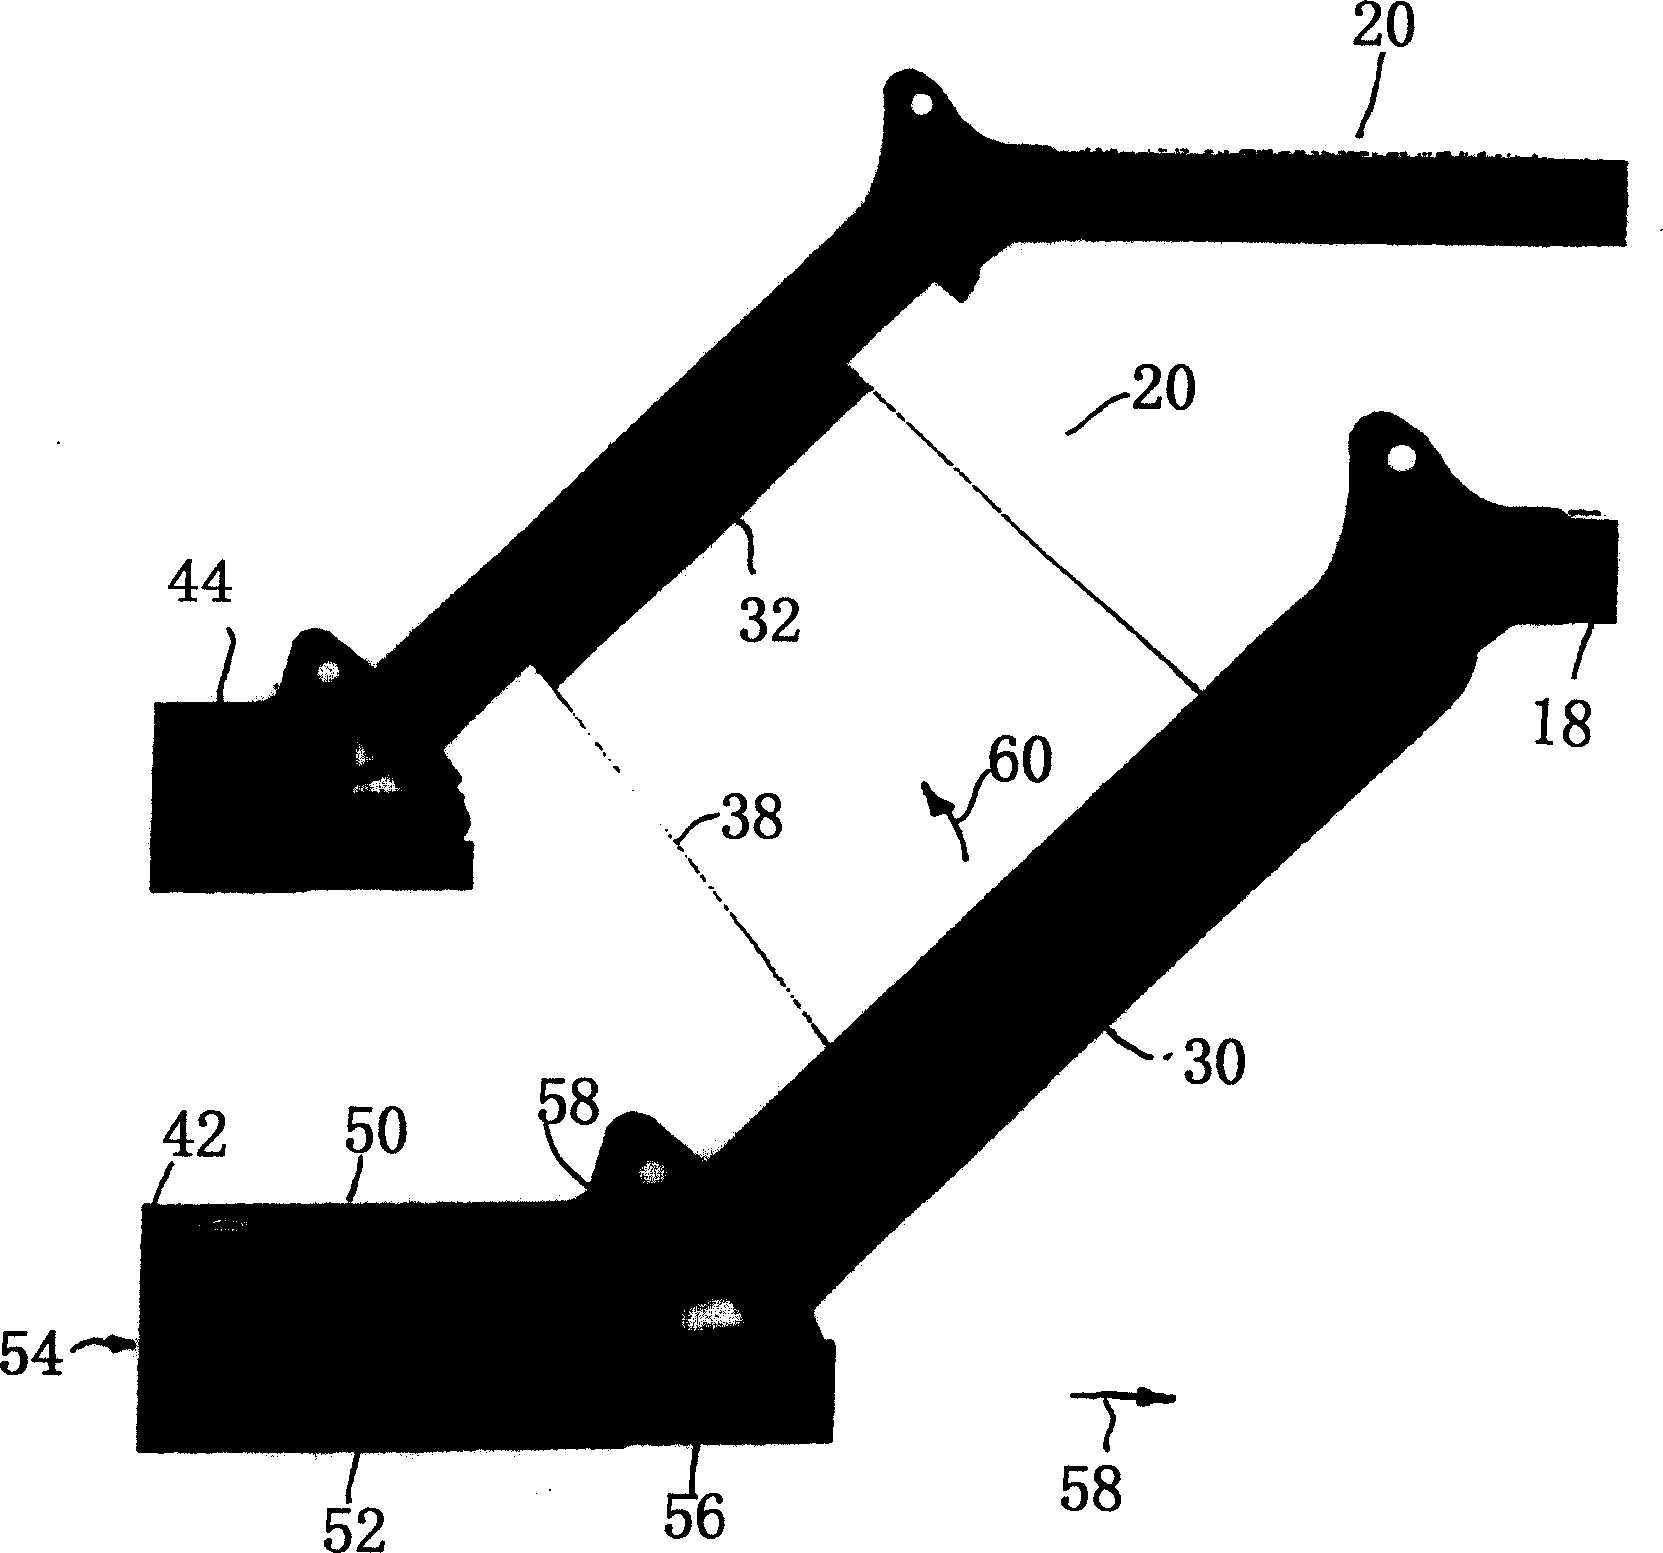 Motor-driven adjustable supporting device for upholstery of sitting and/or reclining furniture, for example of mattress or of bed